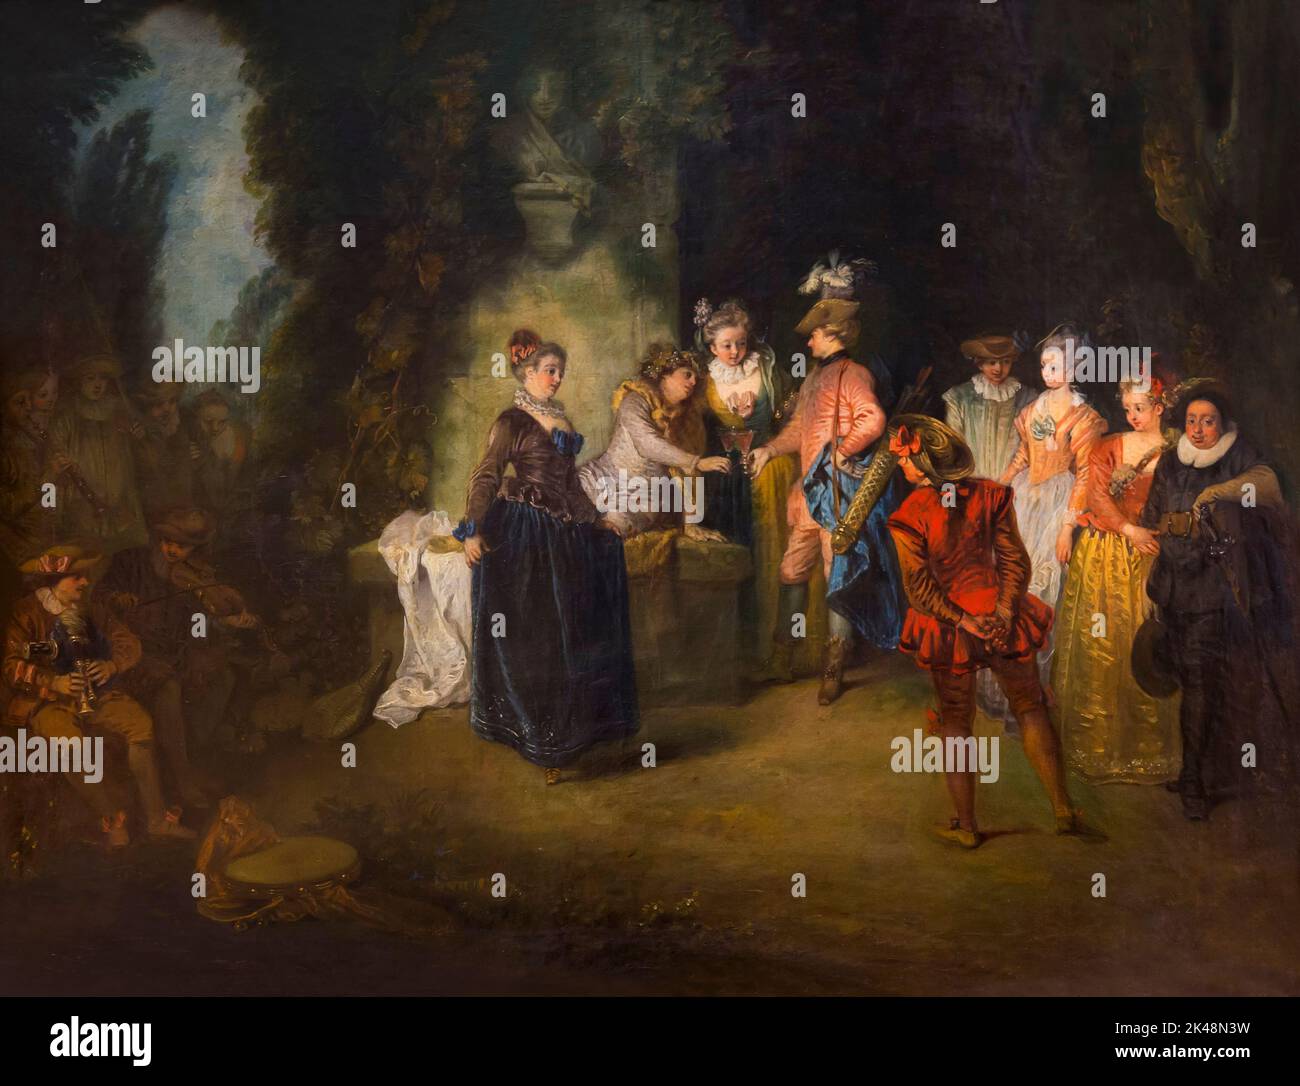 The French Comedy, Jean Antoine Watteau, 1715-1717, Gemaldegalerie, Berlin, Allemagne, Europe Banque D'Images